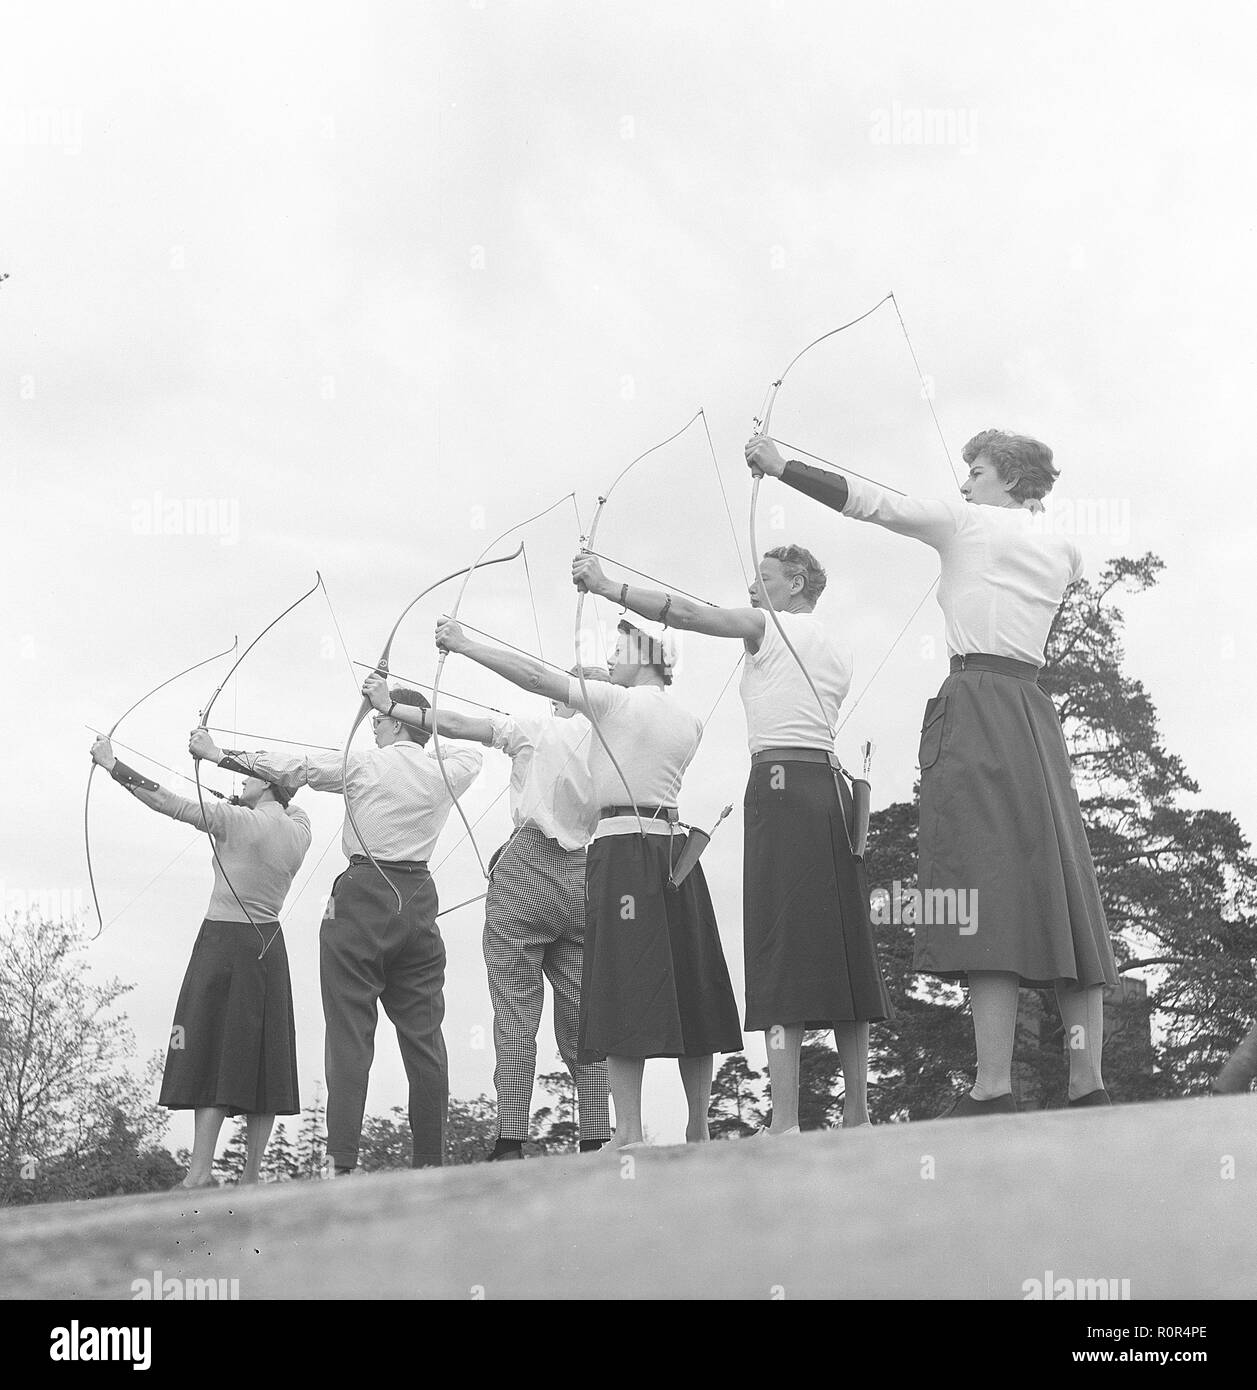 Archery in the 1950s. A group of men and women are standing with their bows and arrows, aiming at a target. Sweden 1957. Photo Kristoffersson Ref BY47-6 Stock Photo